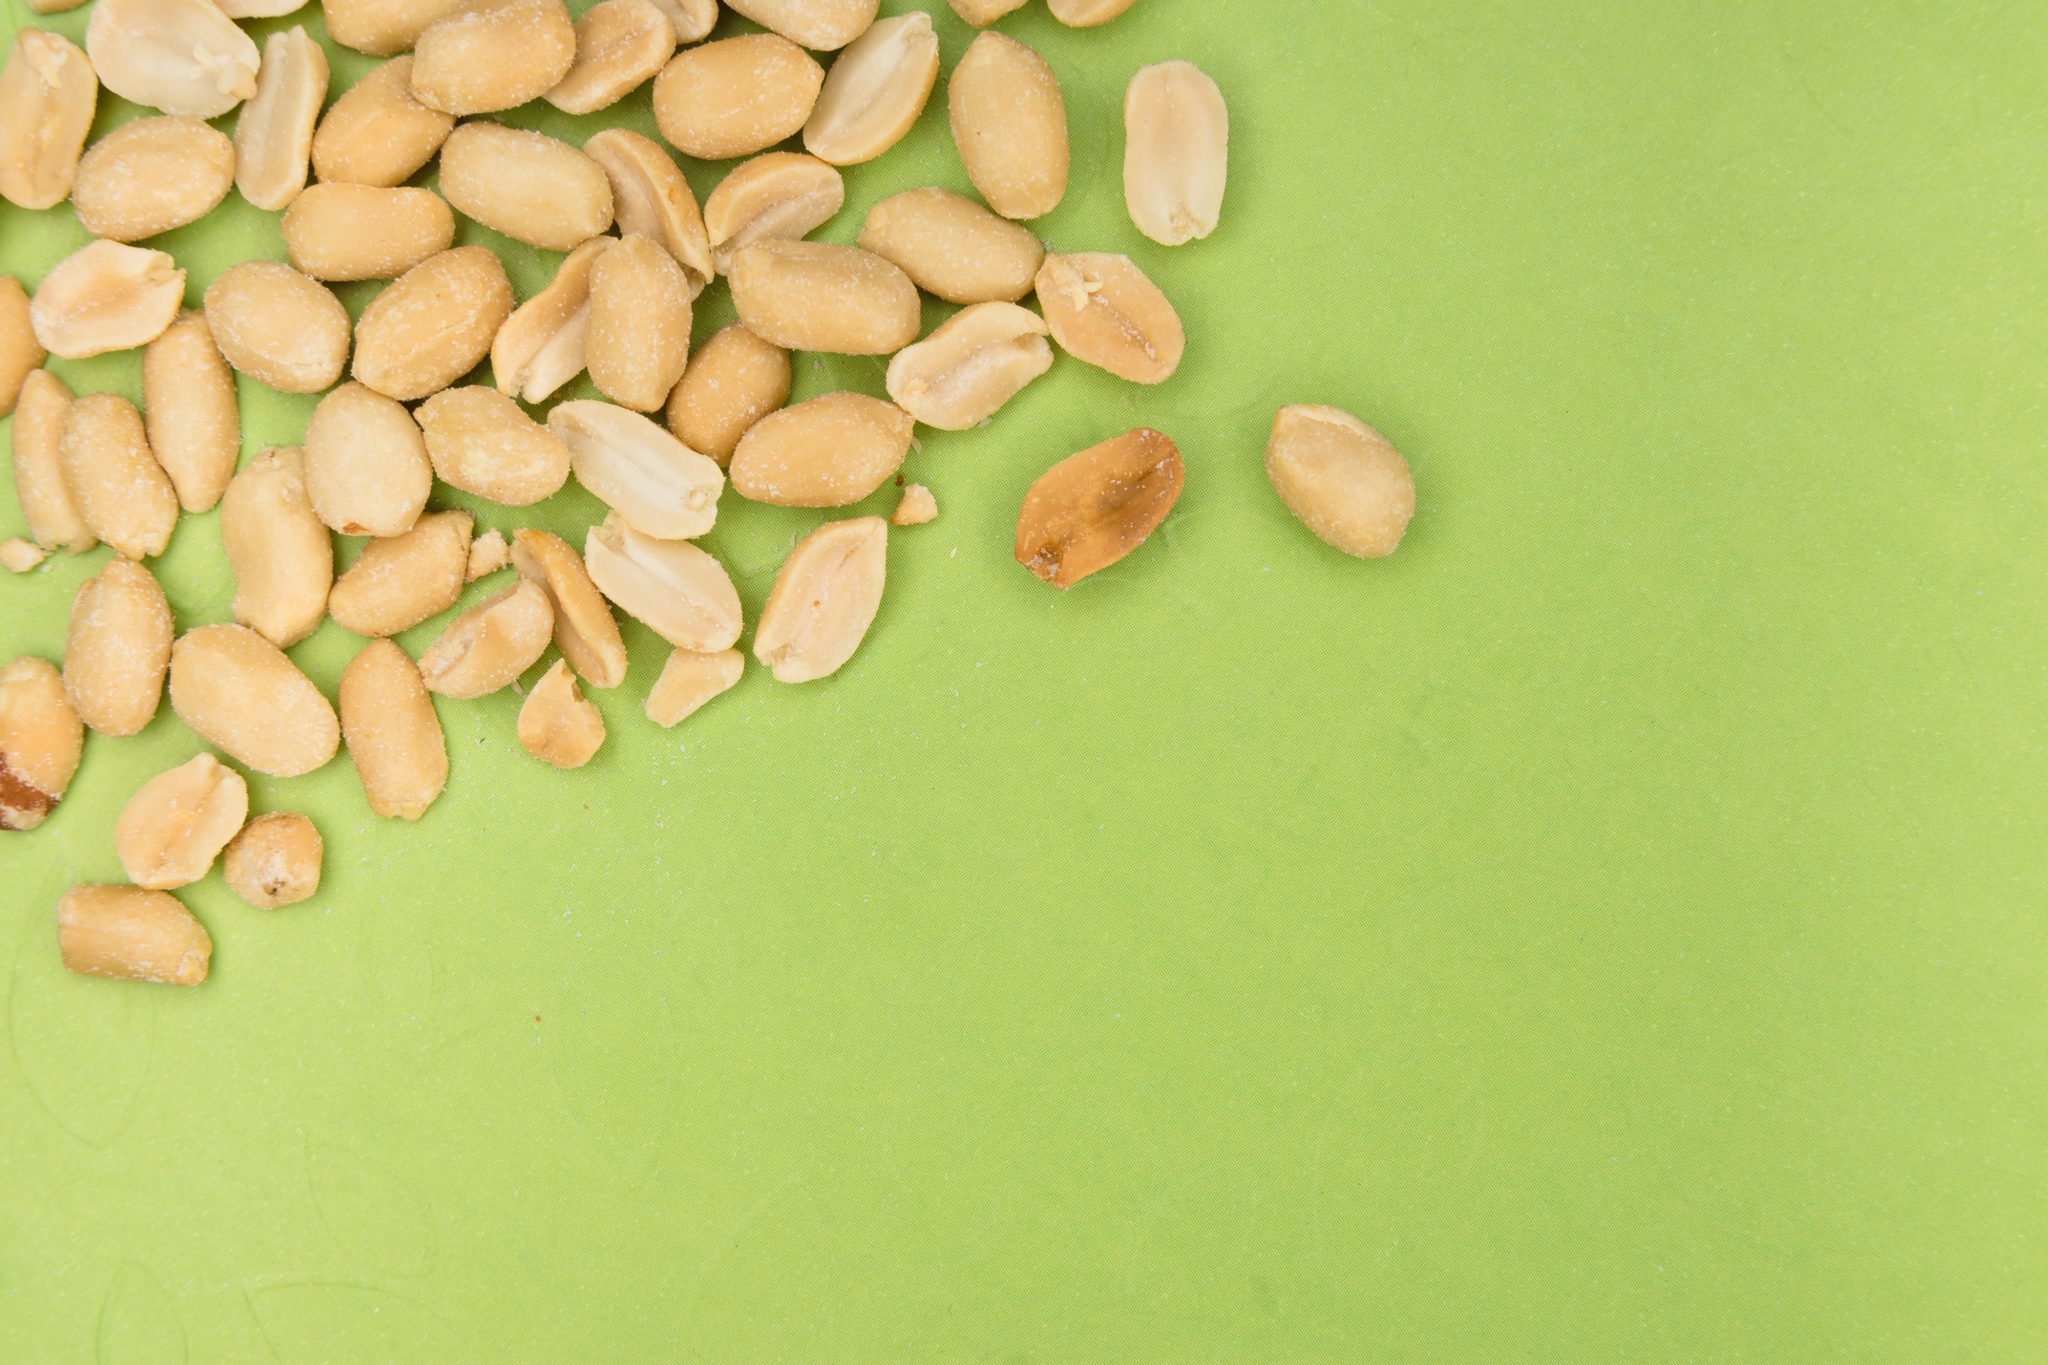 shelled peanuts on a bright green background